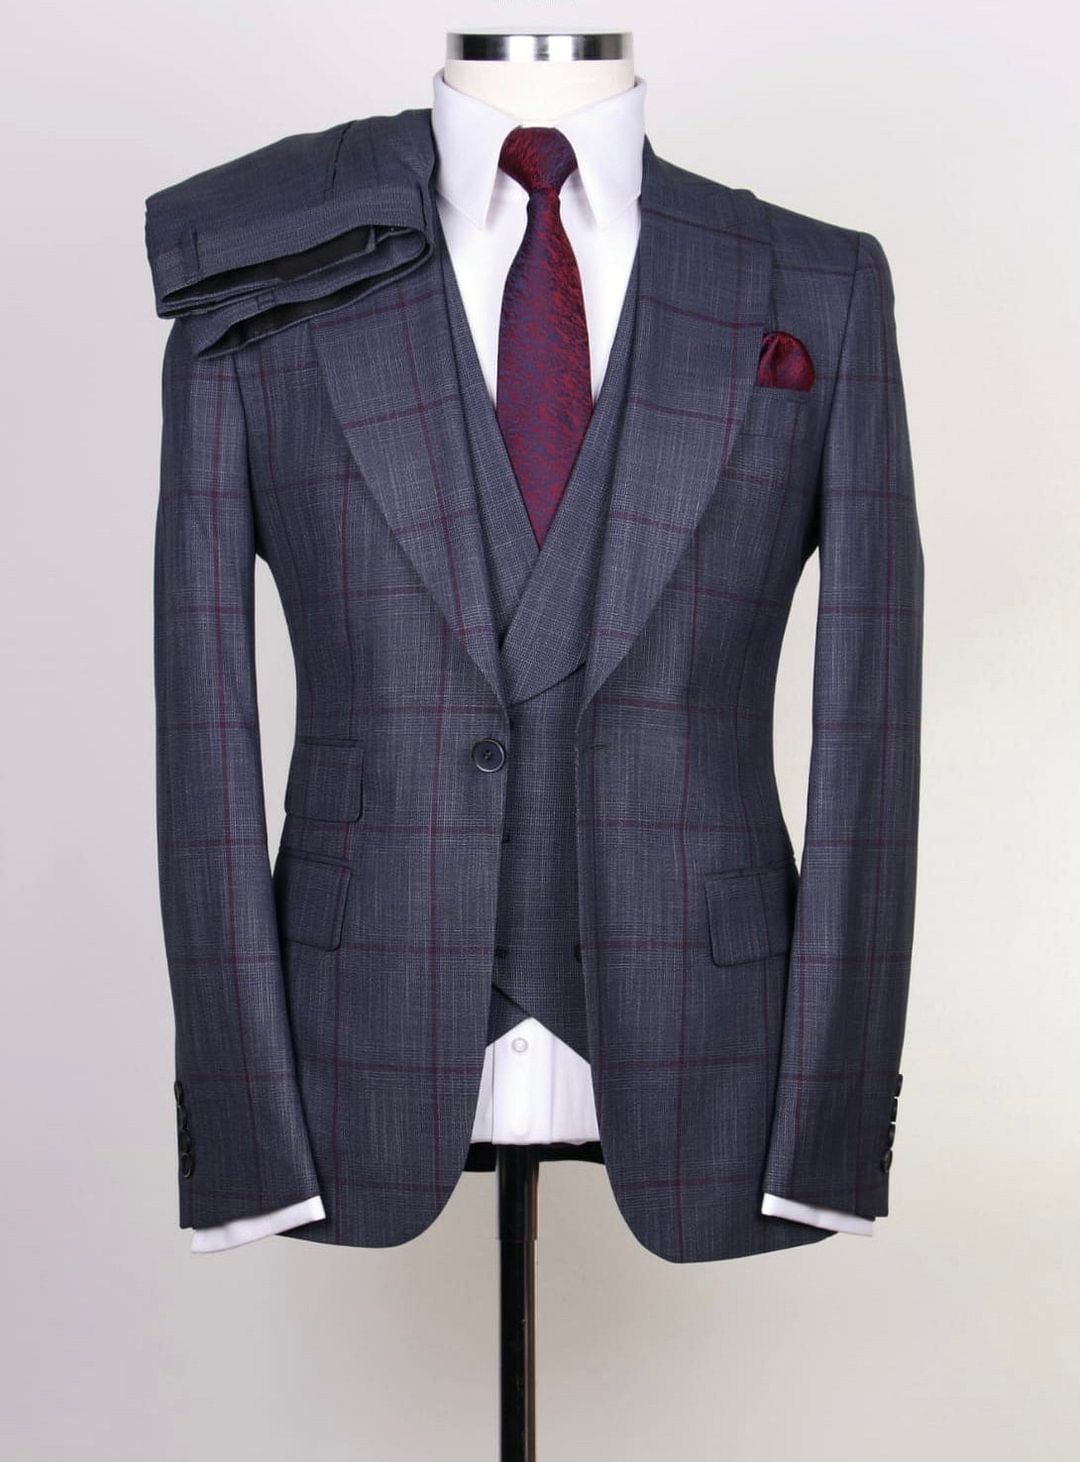 Men's grey and burgundy checked single button 3pcs suit.